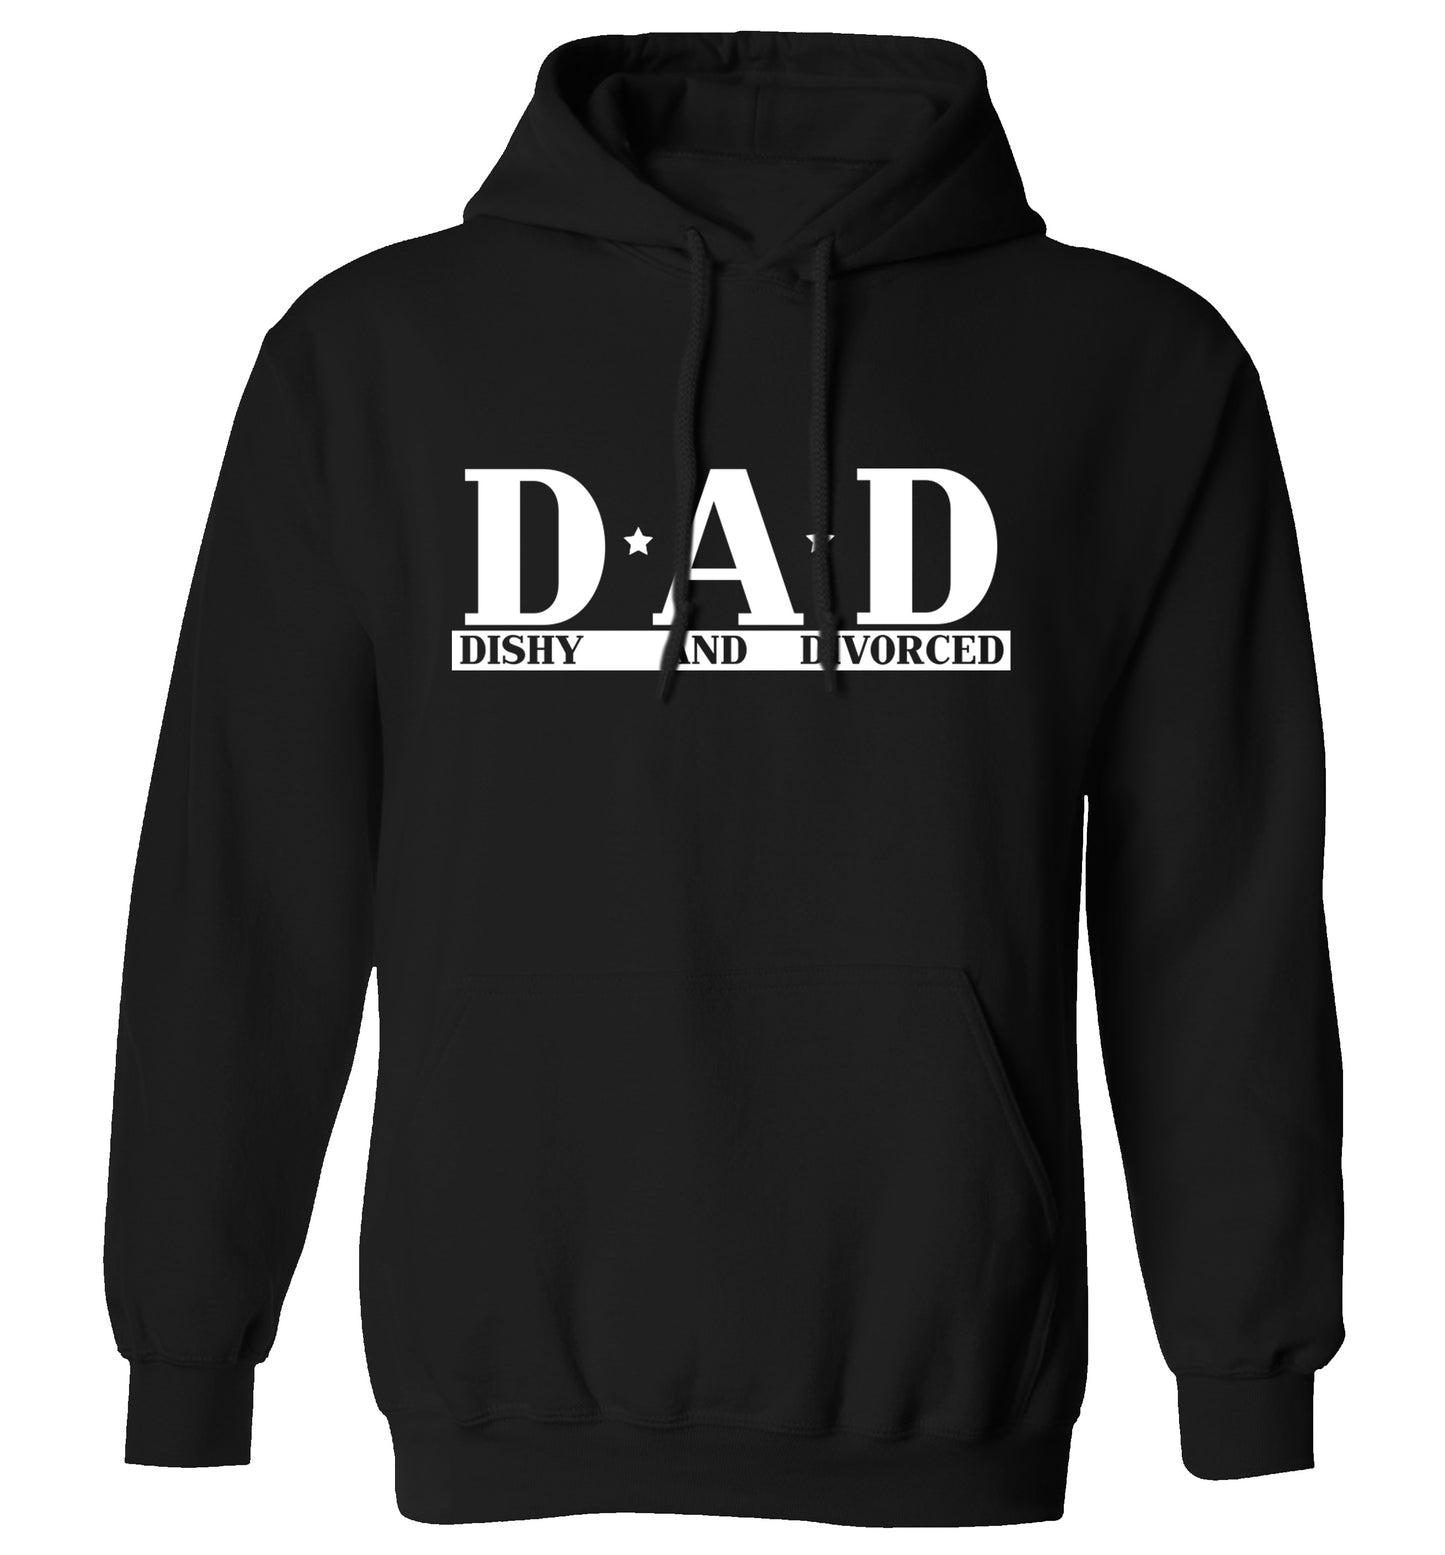 D.A.D meaning Dishy and Divorced adults unisex black hoodie 2XL